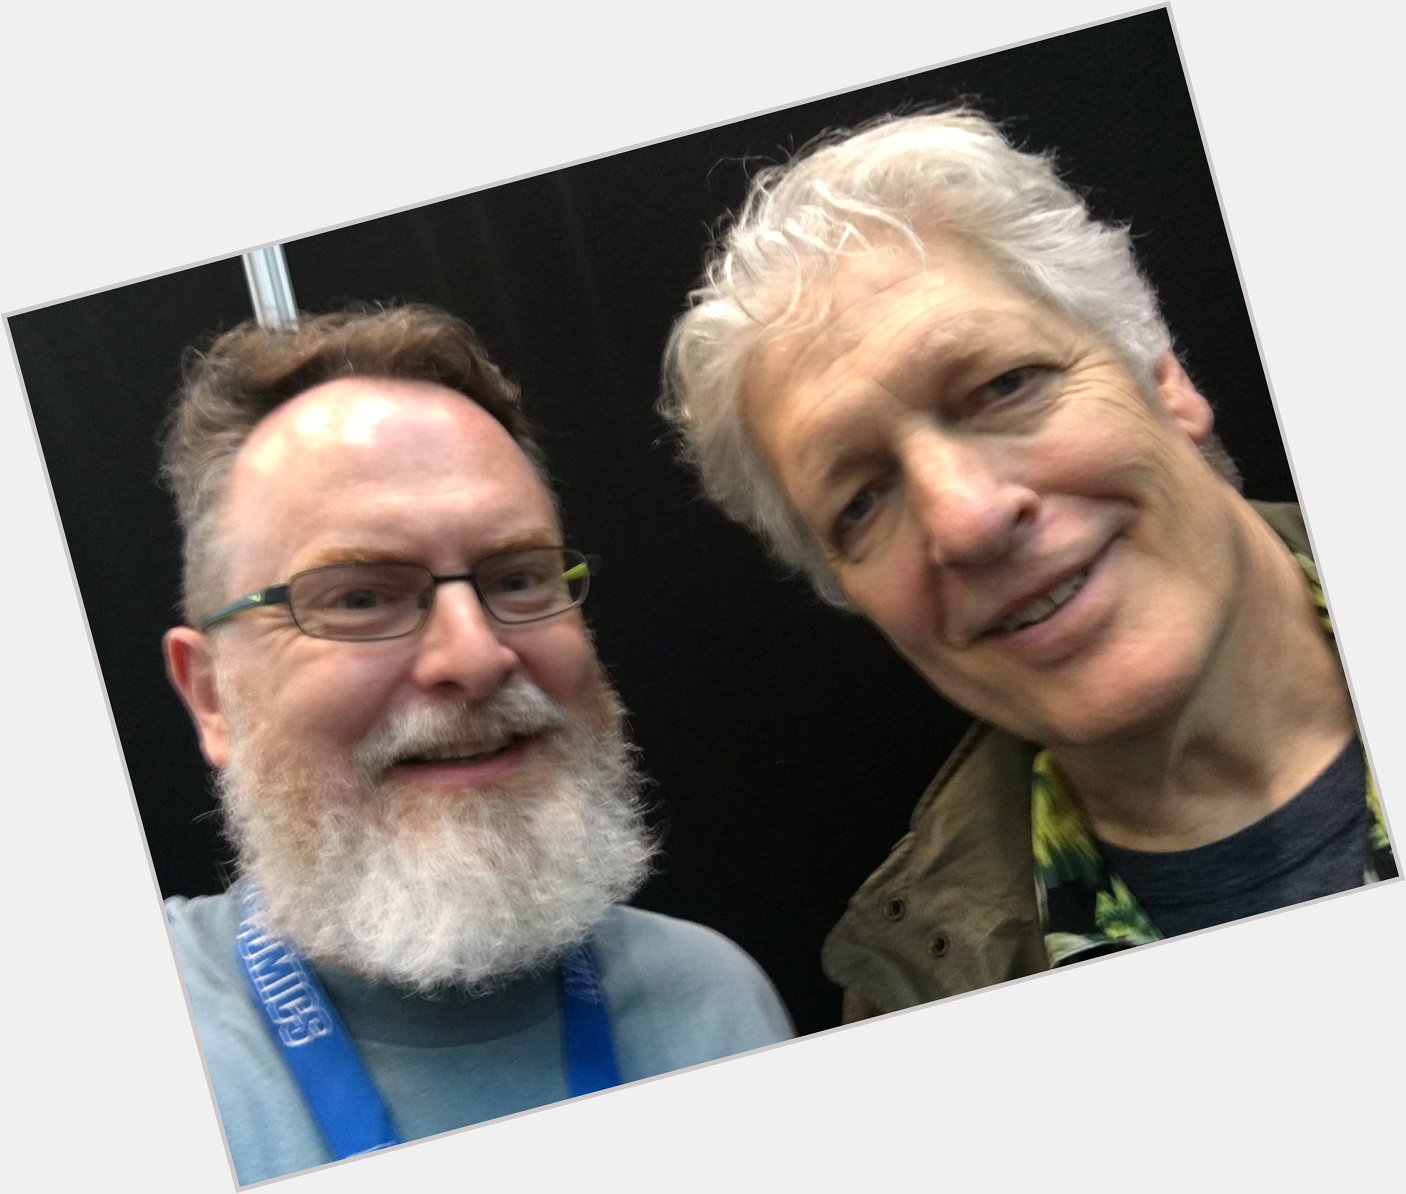 Happy Birthday to Clancy Brown. An absolute legend and I was lucky enough to meet him at NYCC 2019 